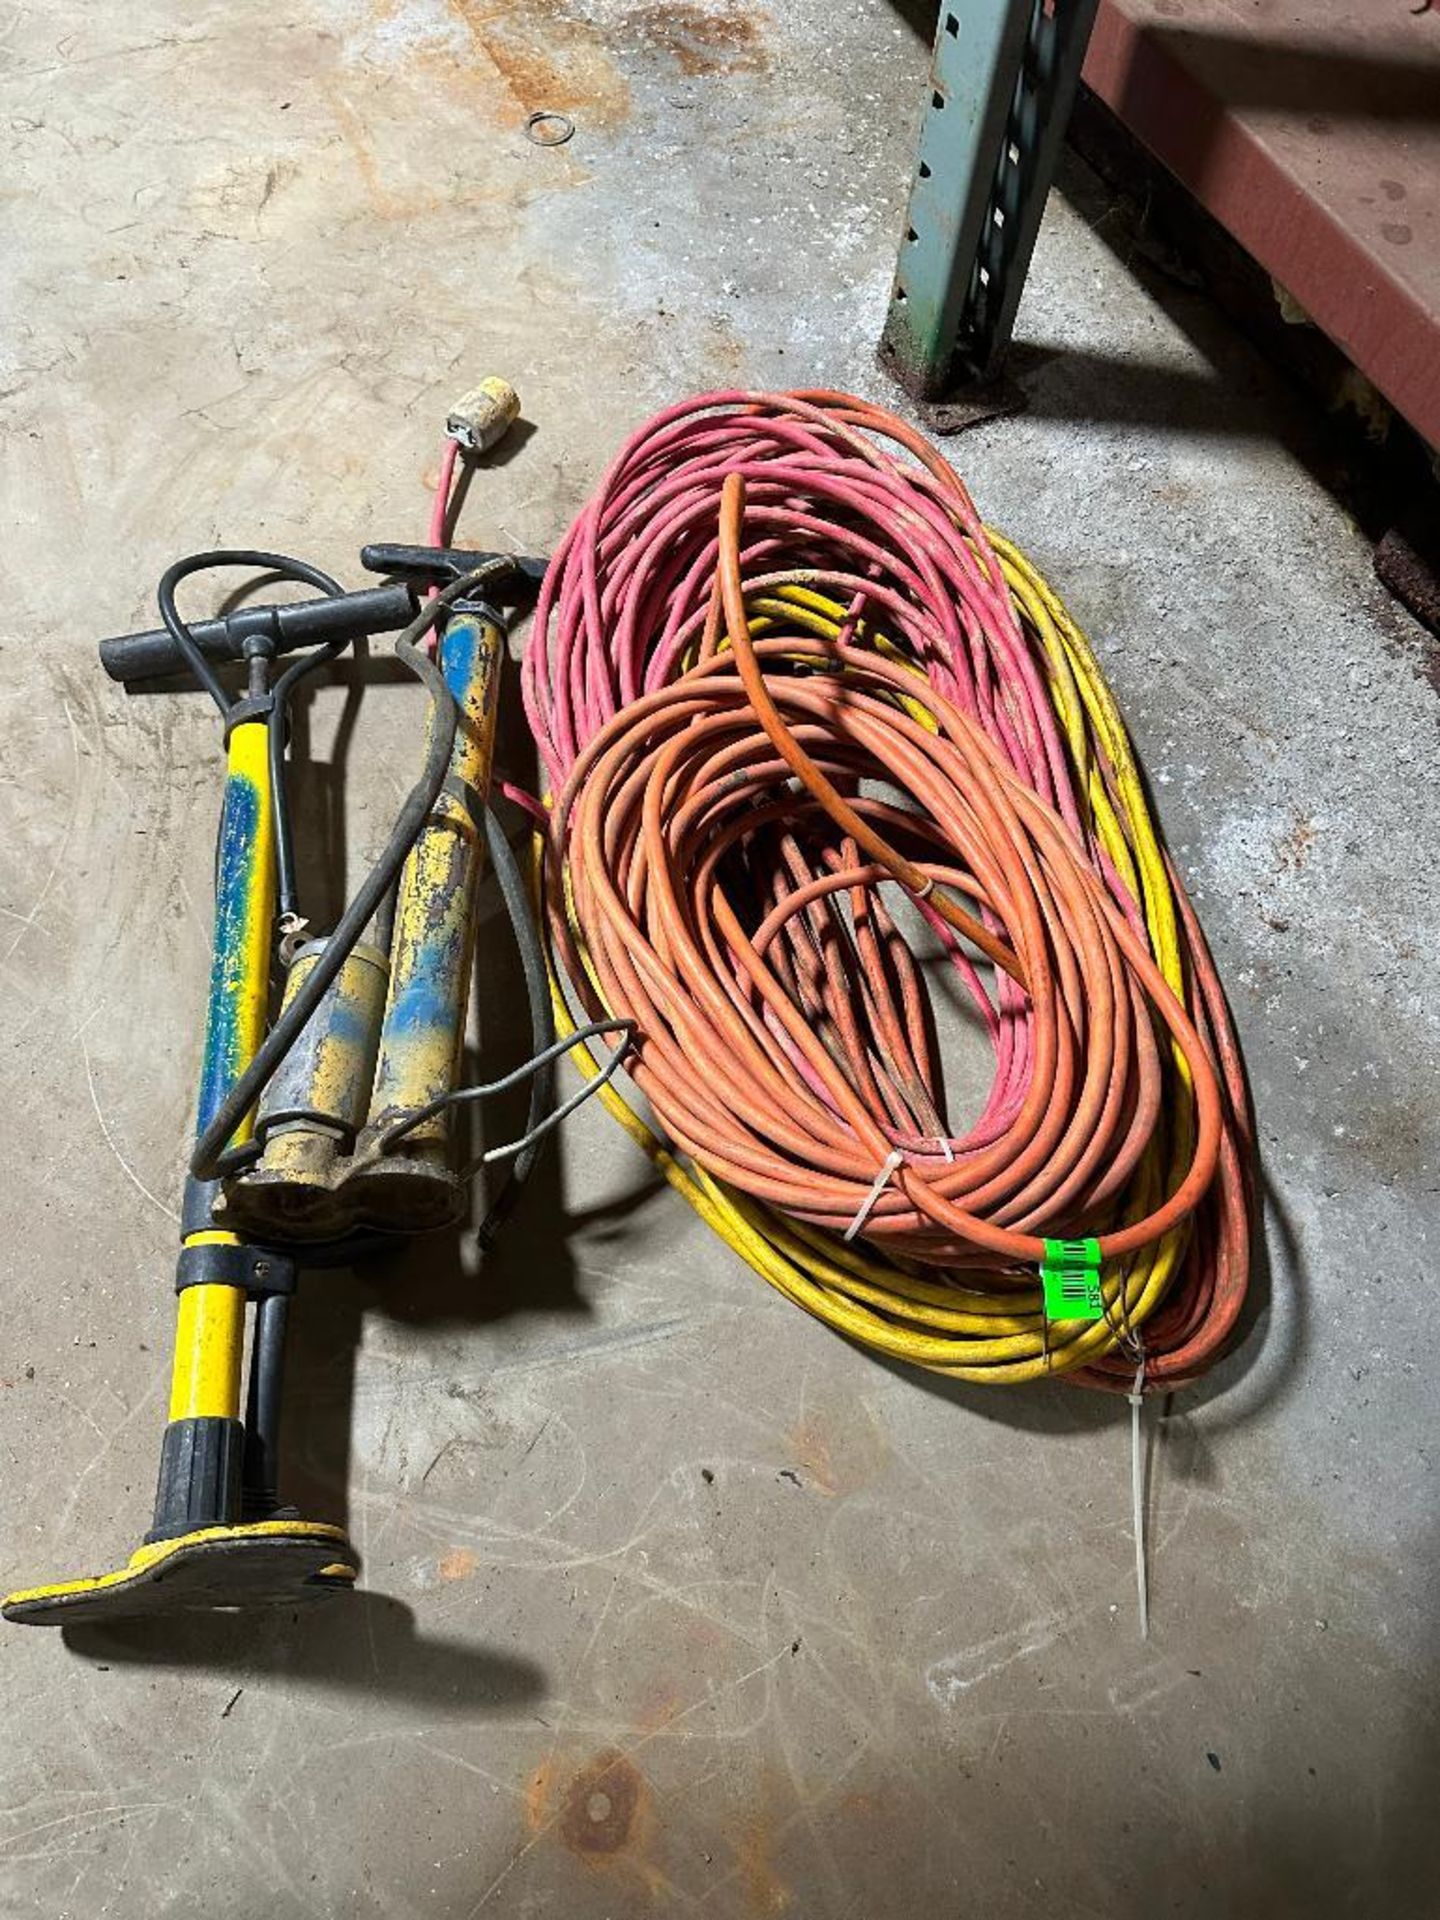 TIRE PUMPS WITH ASSORTED ELECTRICAL CORDS